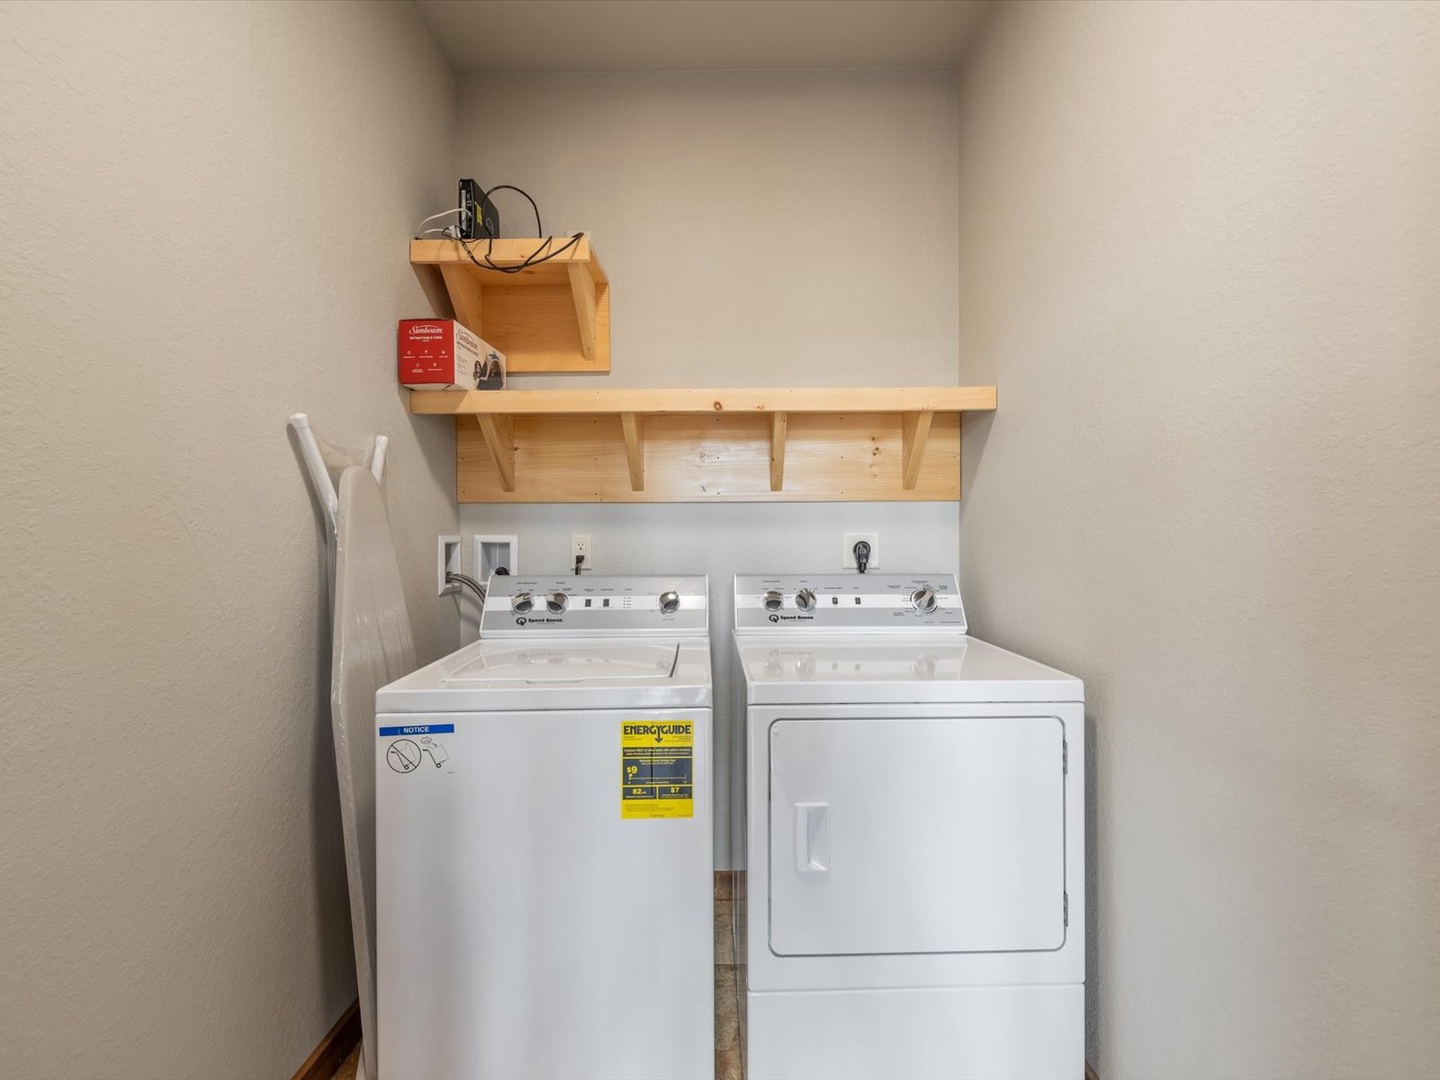 Tranquil Escape of Blue Ridge - Entry Level Laundry Room